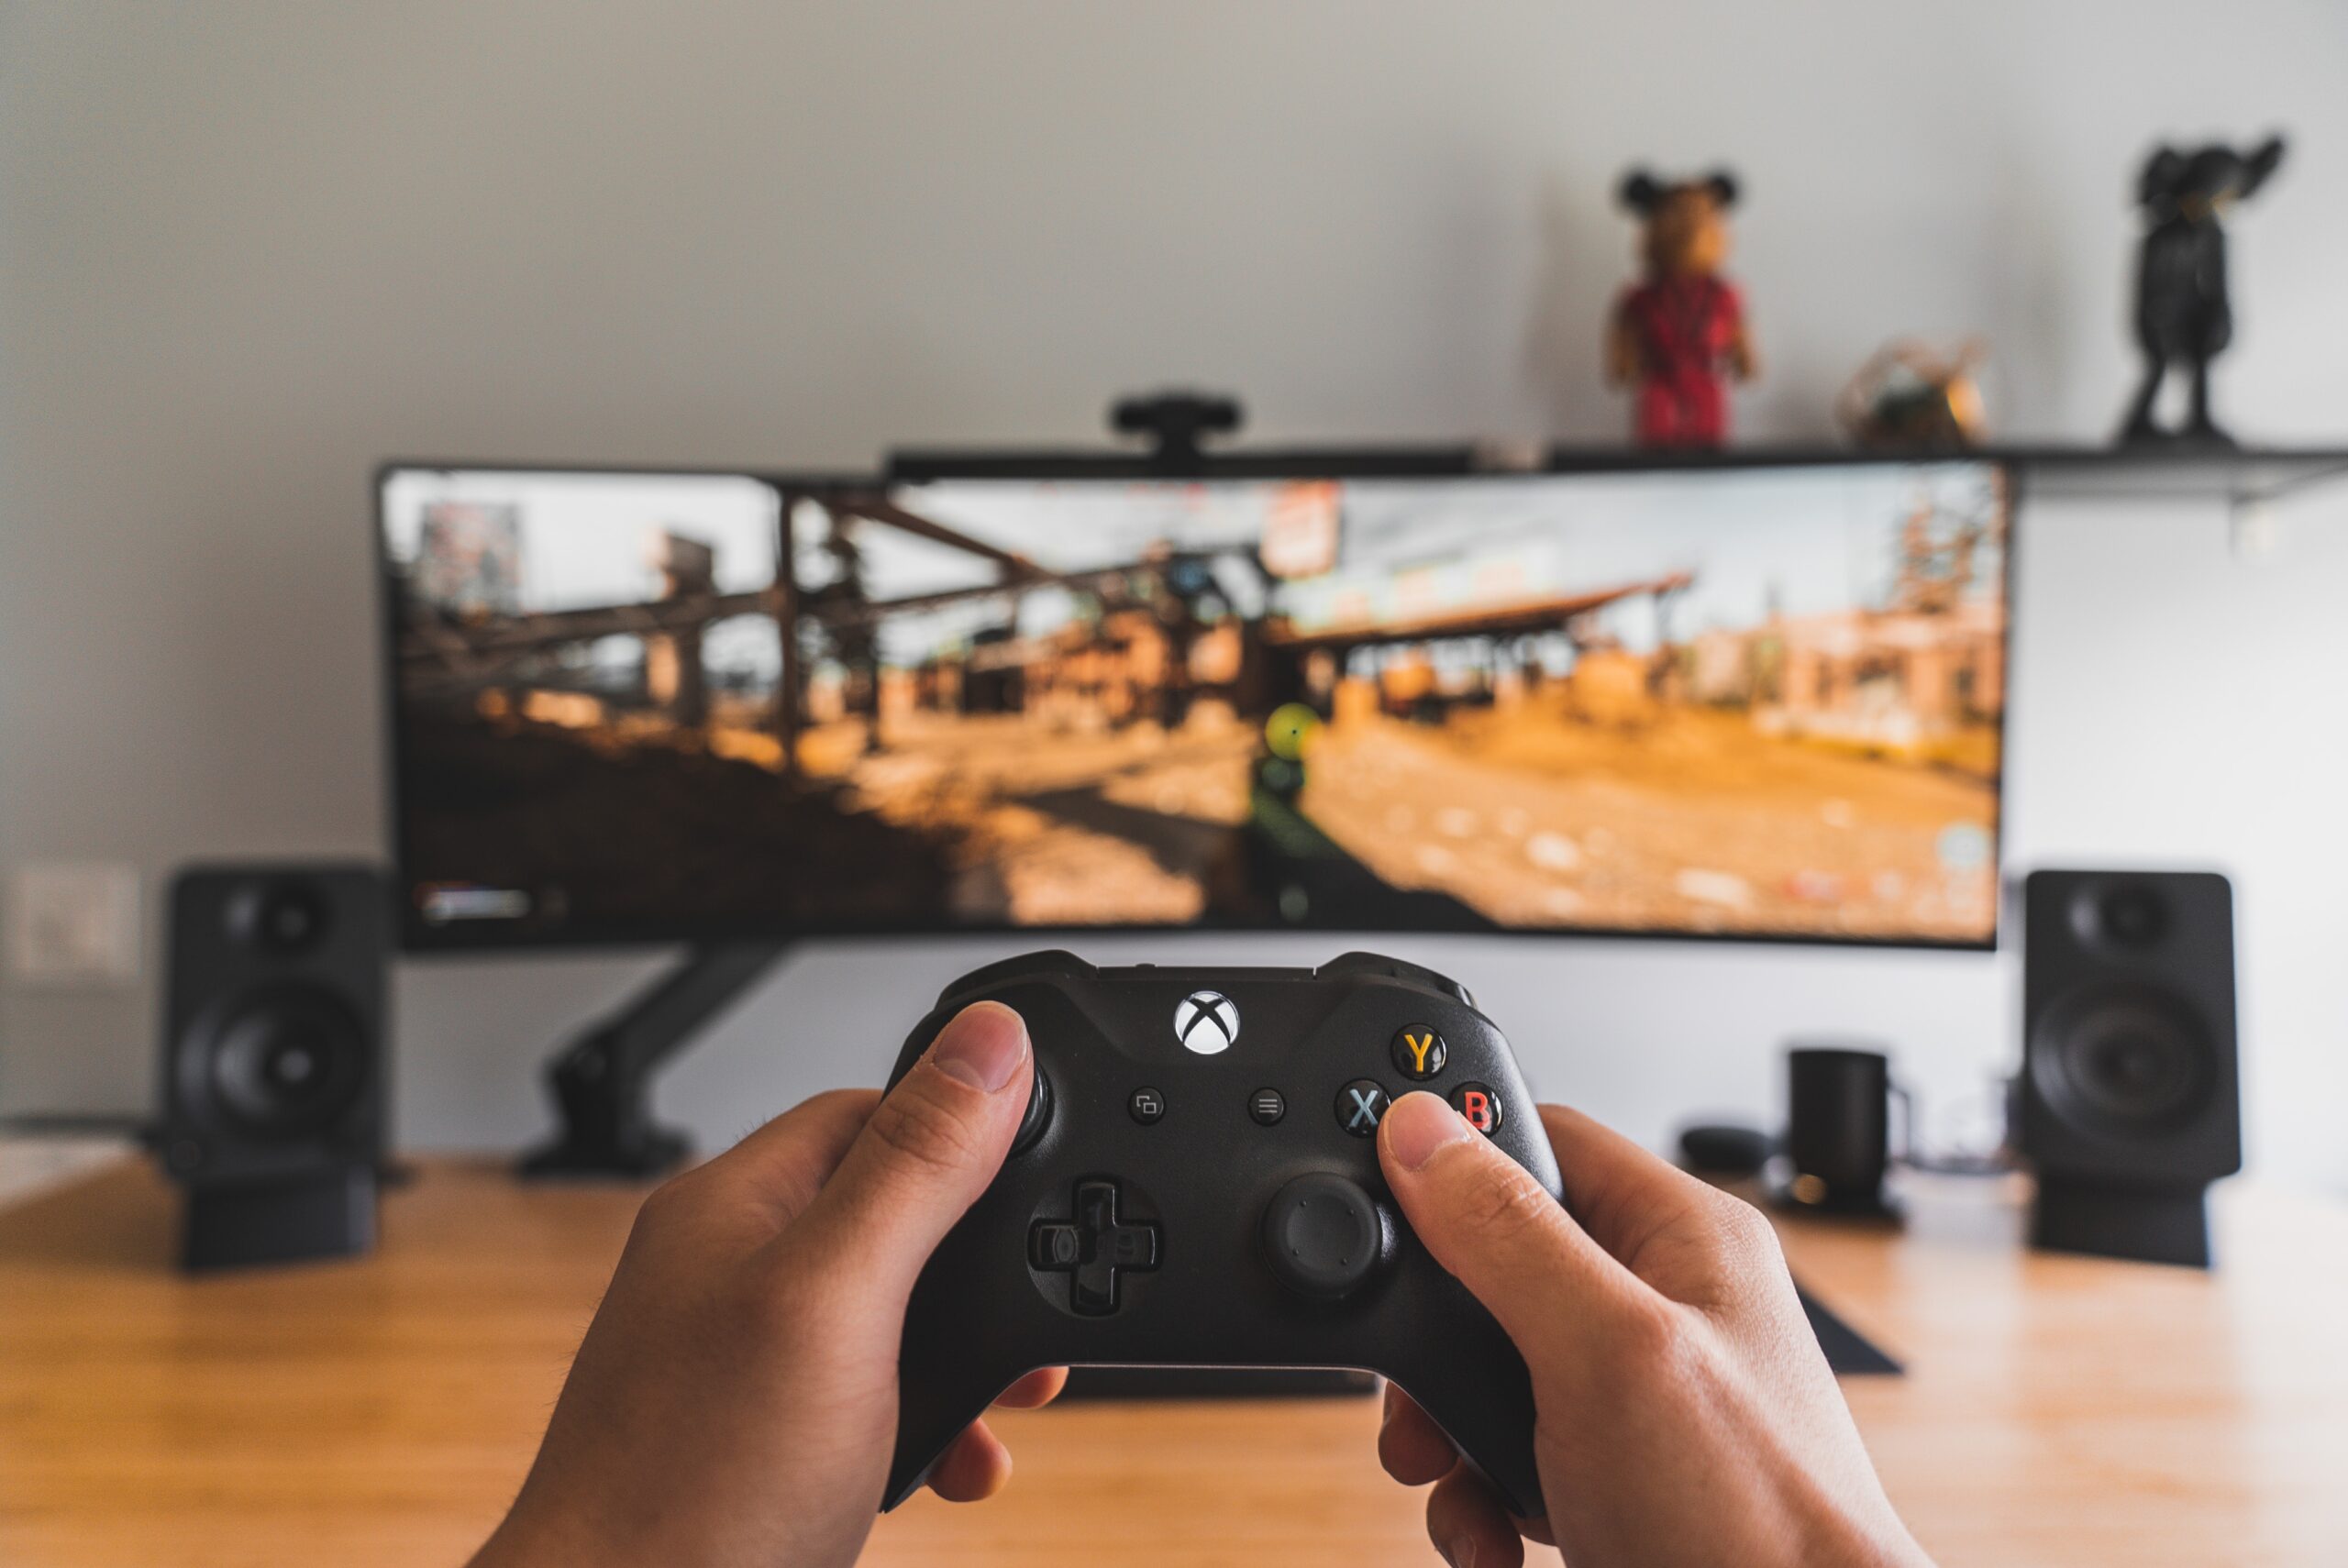 Two hands hold an Xbox controller in front of a a wide display